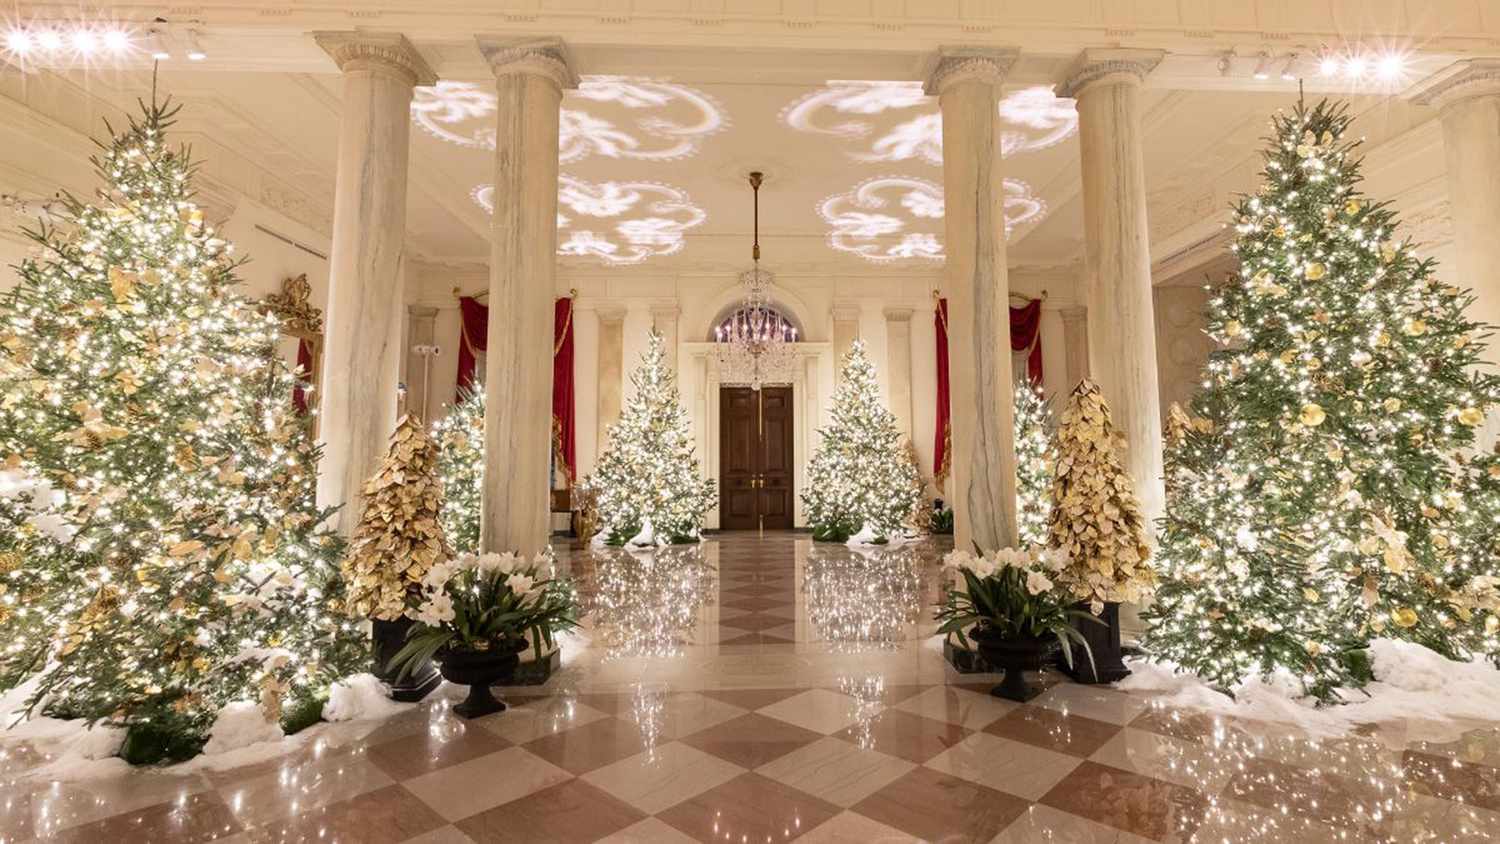 Melania Trump to Decorate White House for Christmas One Last Time | PEOPLE.com